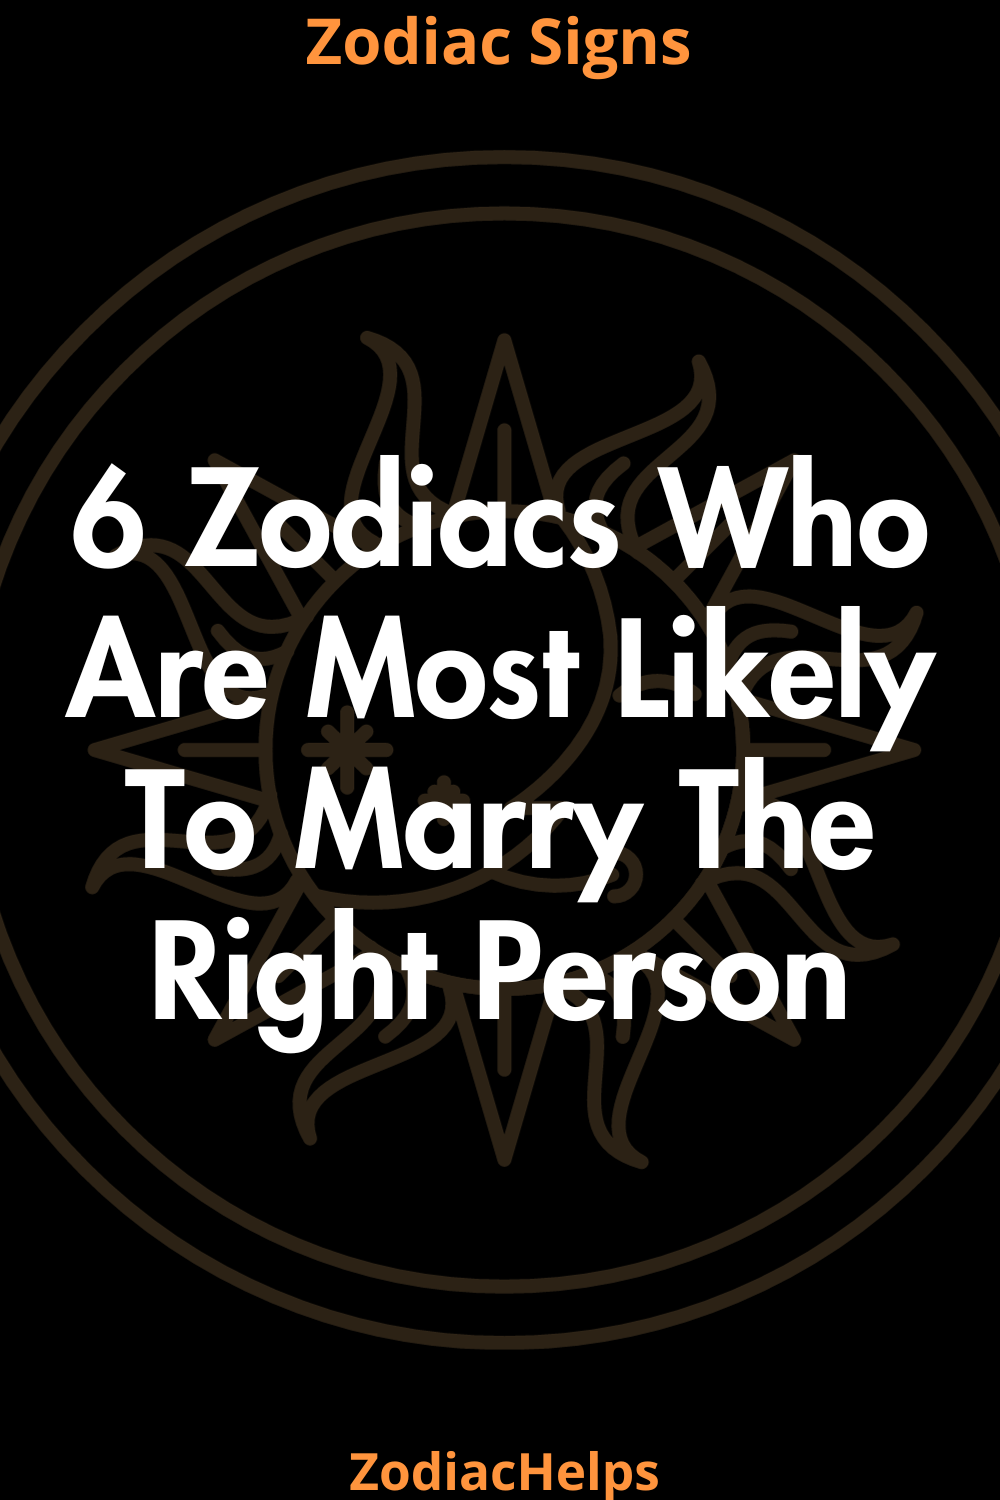 6 Zodiacs Who Are Most Likely To Marry The Right Person